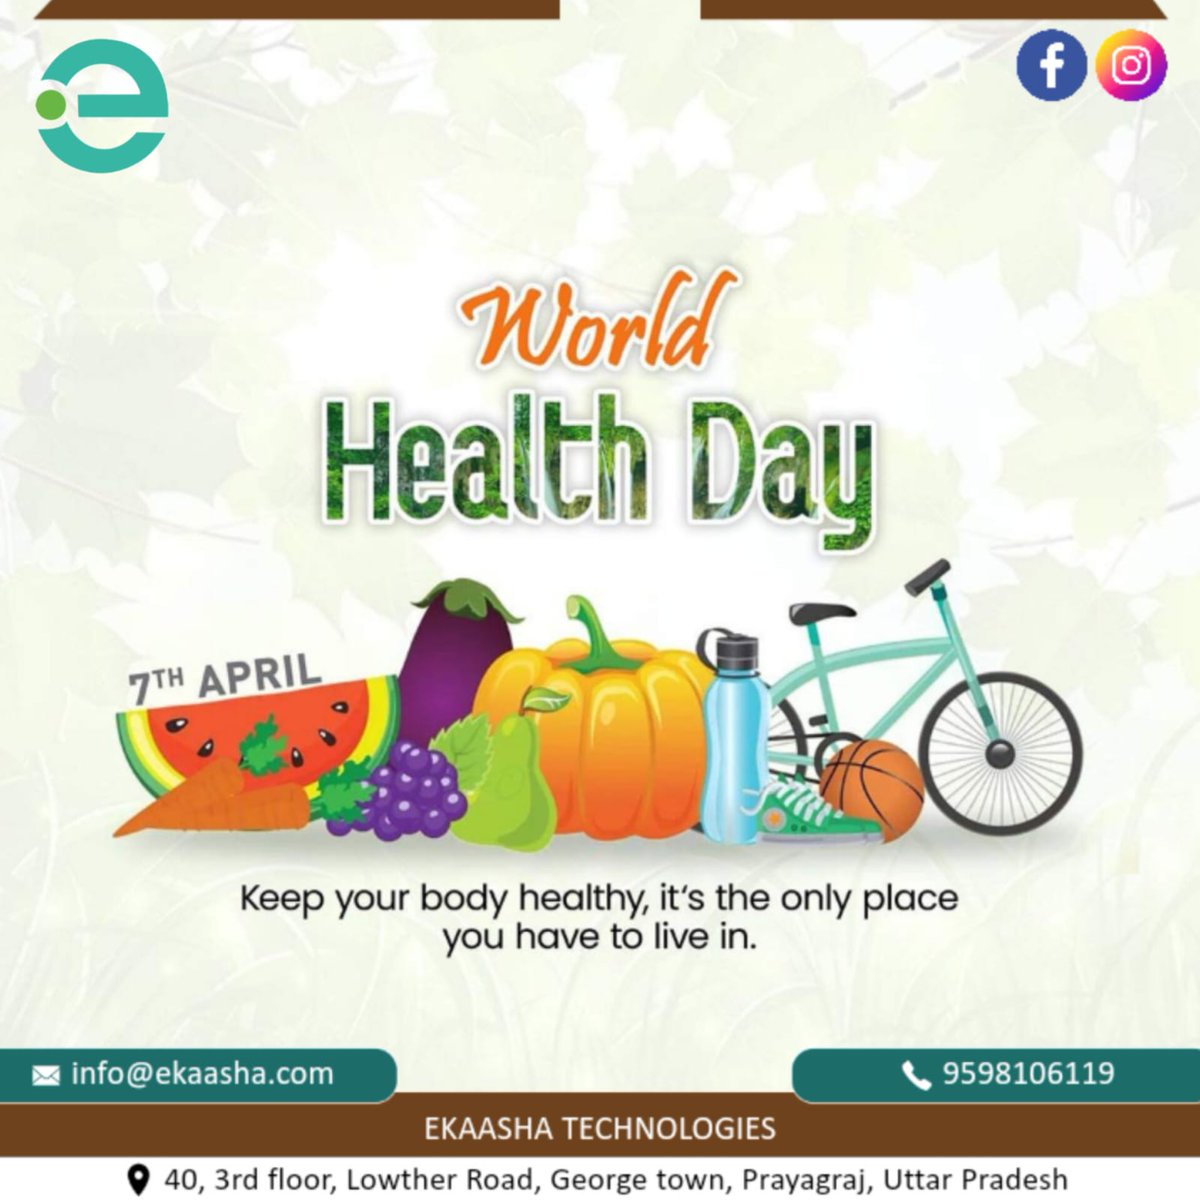 😇On World Health Day
🫡🤗May you achieve all your goals and dreams in life, while maintaining a healthy work-life balance.💁🏻‍♀️🏵️
:
:
:
#WorldHealthDay #HealthForAll #StayHealthy #HealthyLiving #HealthEquity
#VaccinesWork #GlobalHealth #COVID19 #SafeHands #SupportNursesAndMidwives